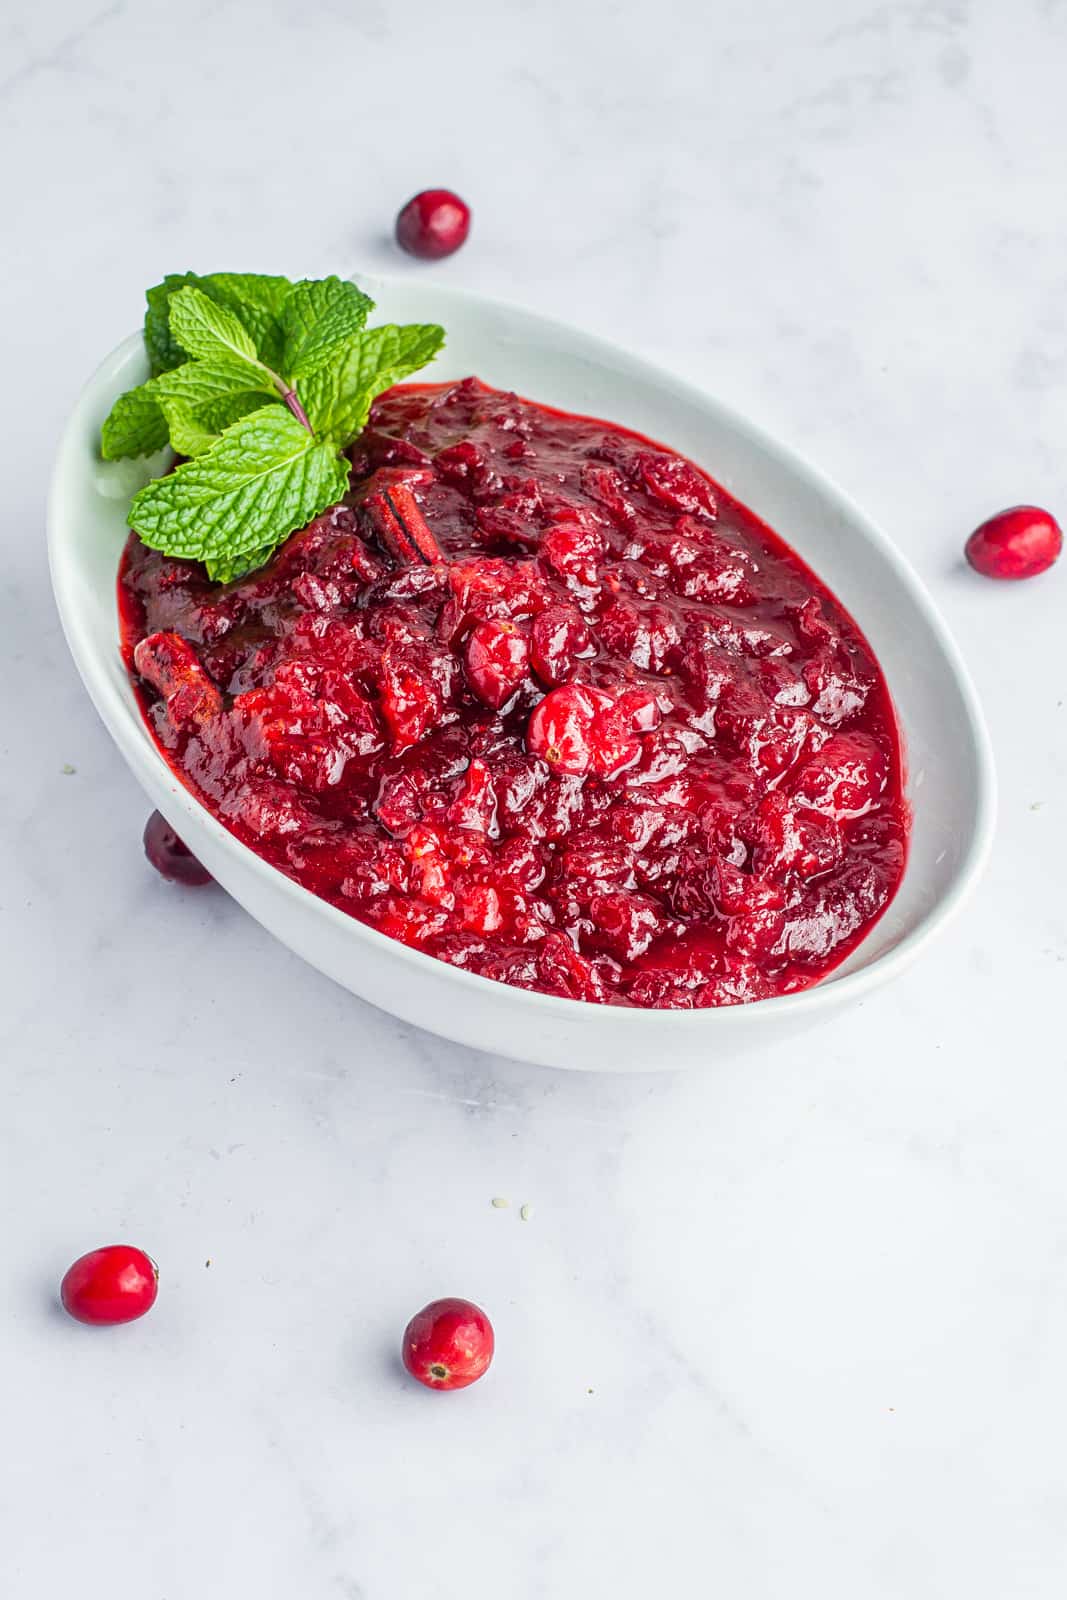 Cranberry sauce garnished with mint in a glass serving dish